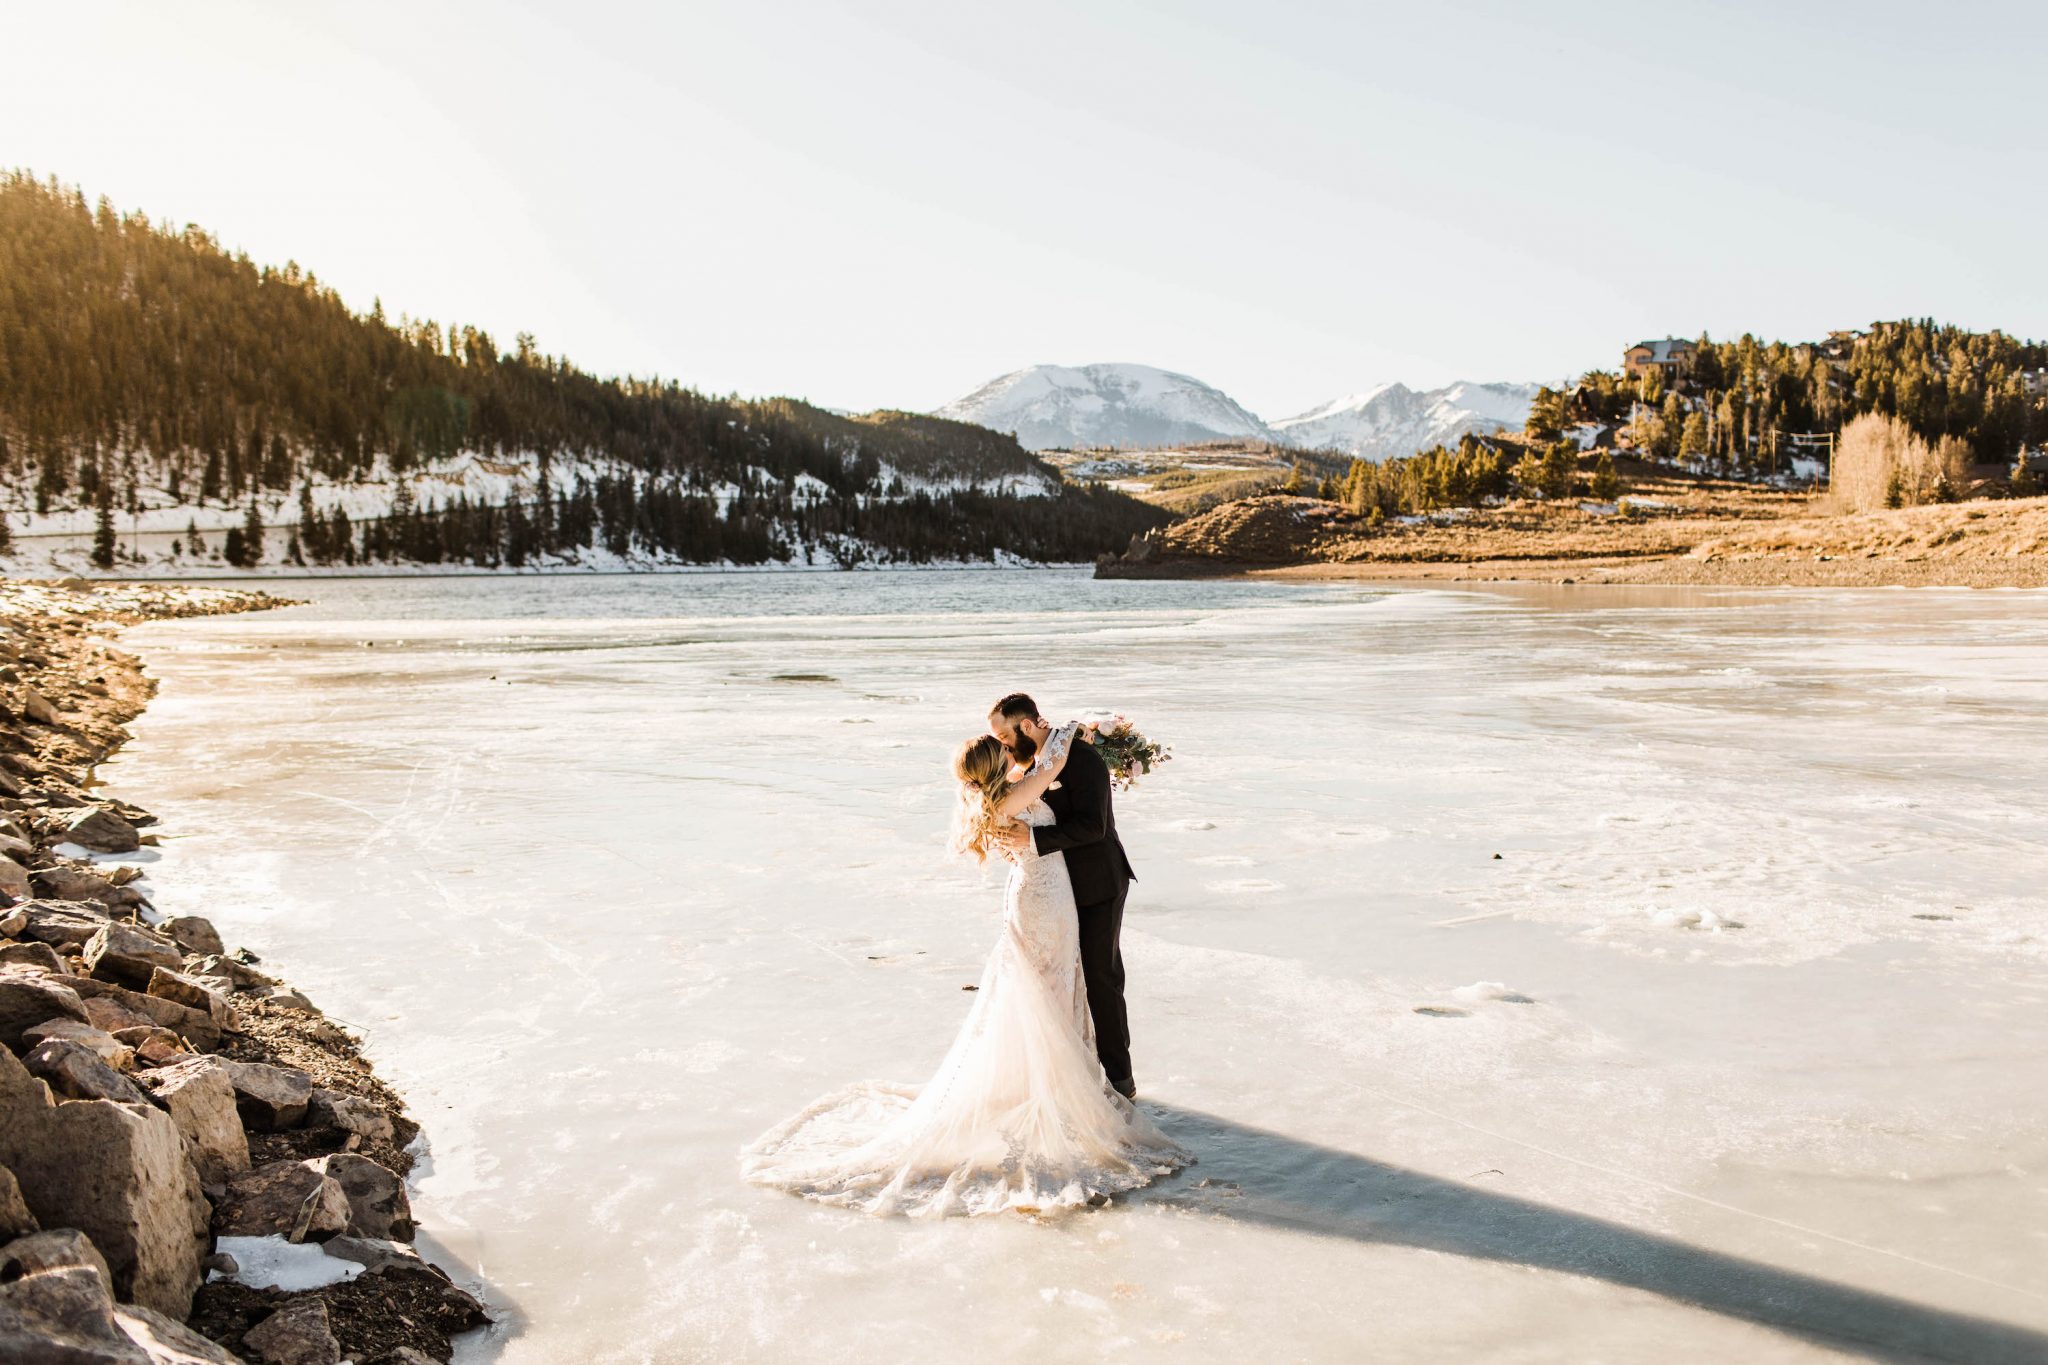 10 Best Places To Elope In The US Our Top USA Elopement Locations